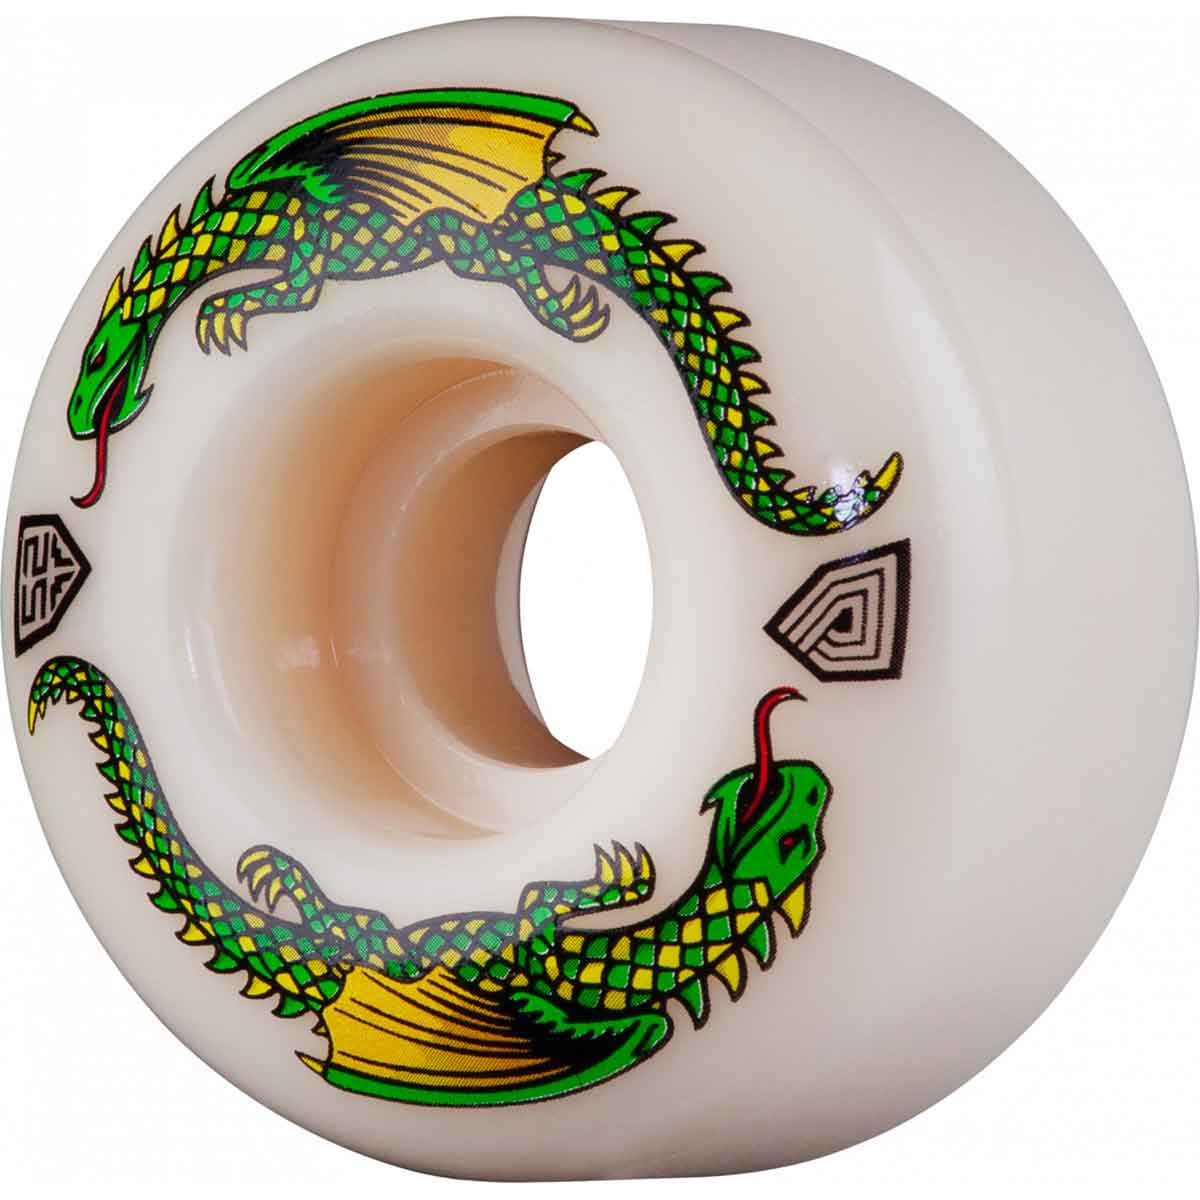 Powell Peralta Dragon Formula Green Dragon 52mm 93a Wheels. Skate the amazing new urethane formula from Powell Peralta. Free N.Z shipping on orders over $100. Pavement skate shop, Dunedin.